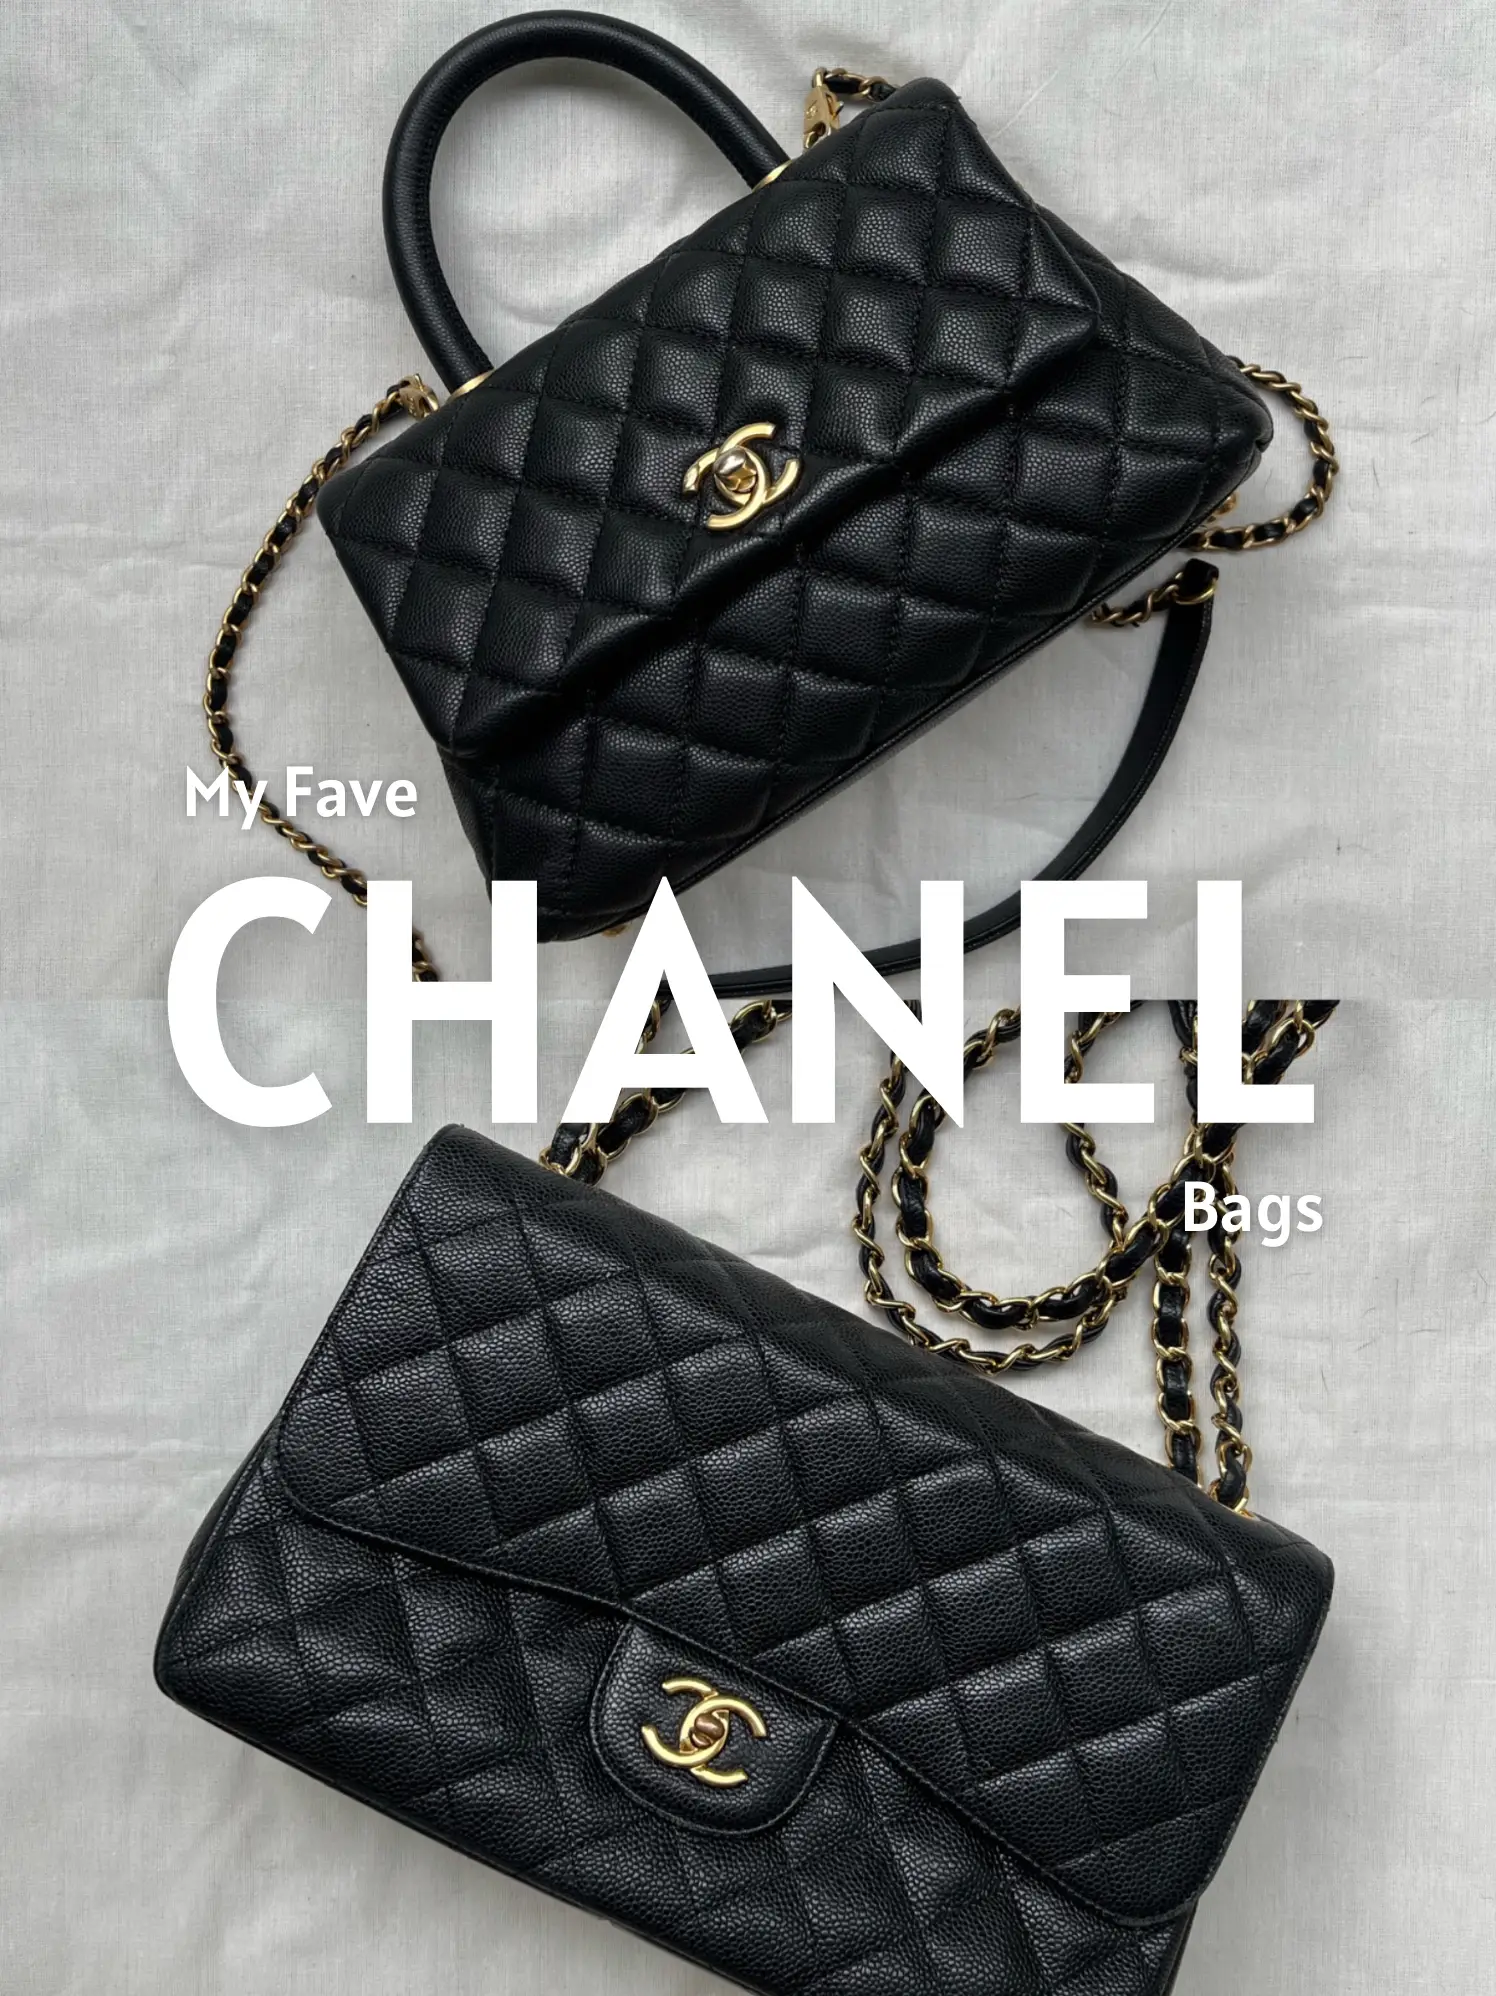 My go to Chanel Bags✨, Gallery posted by 𝓘𝓼𝓪𝓫𝓮𝓵